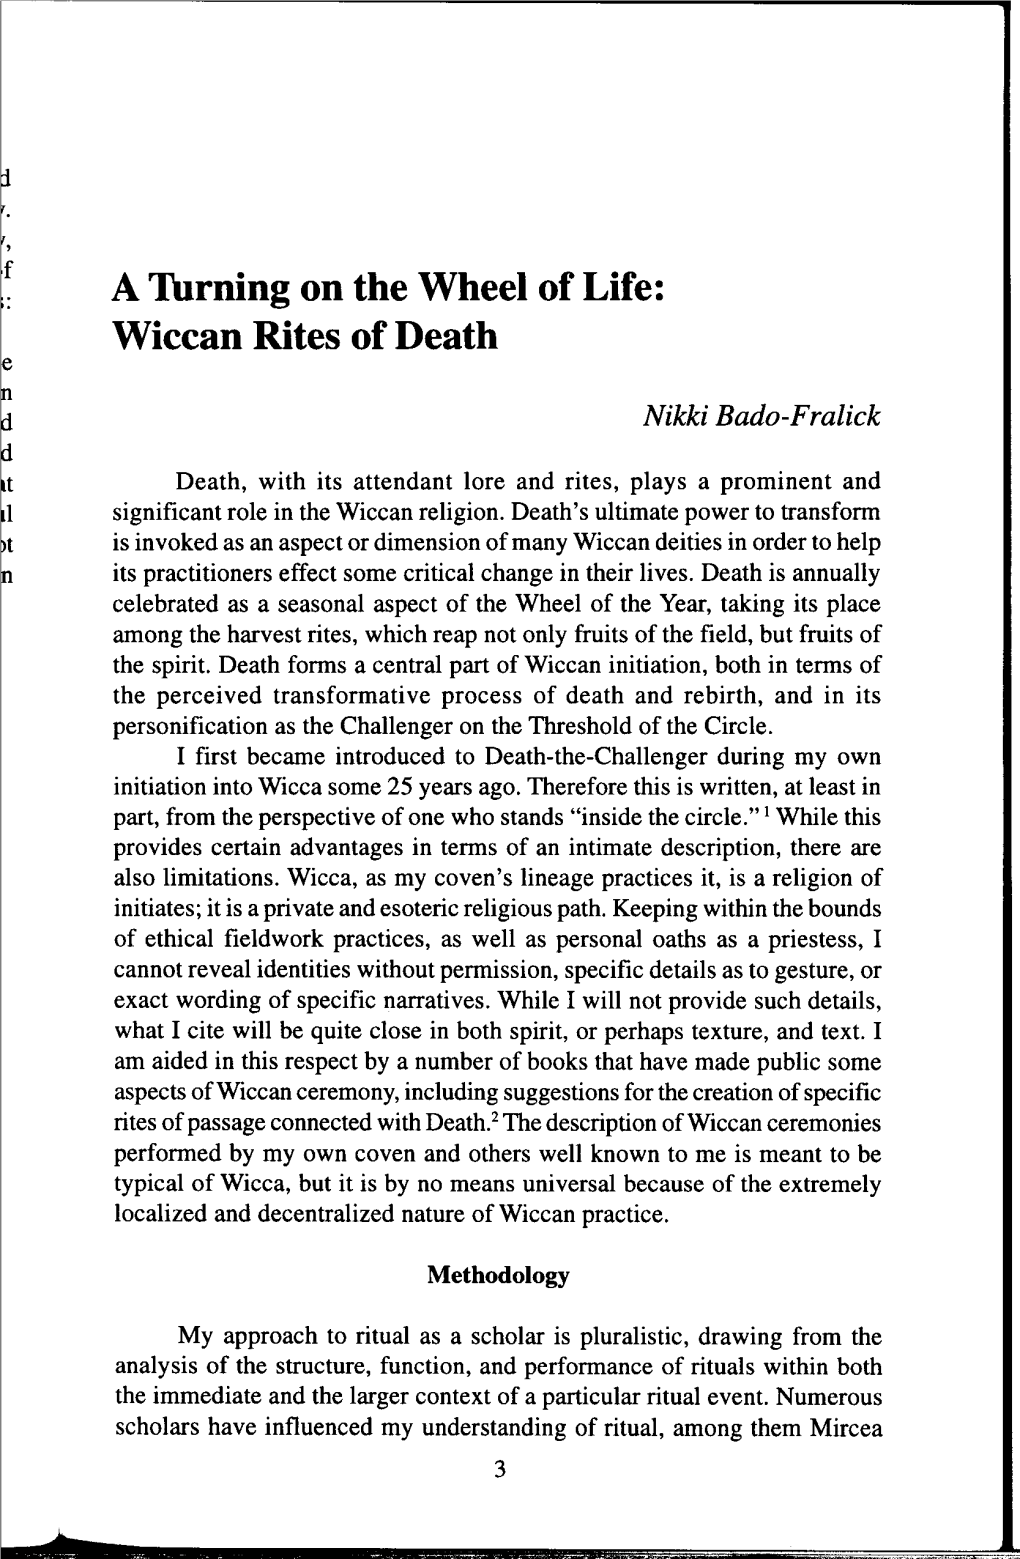 A Lhrning on the Wheel of Life: Wiccan Rites of Death